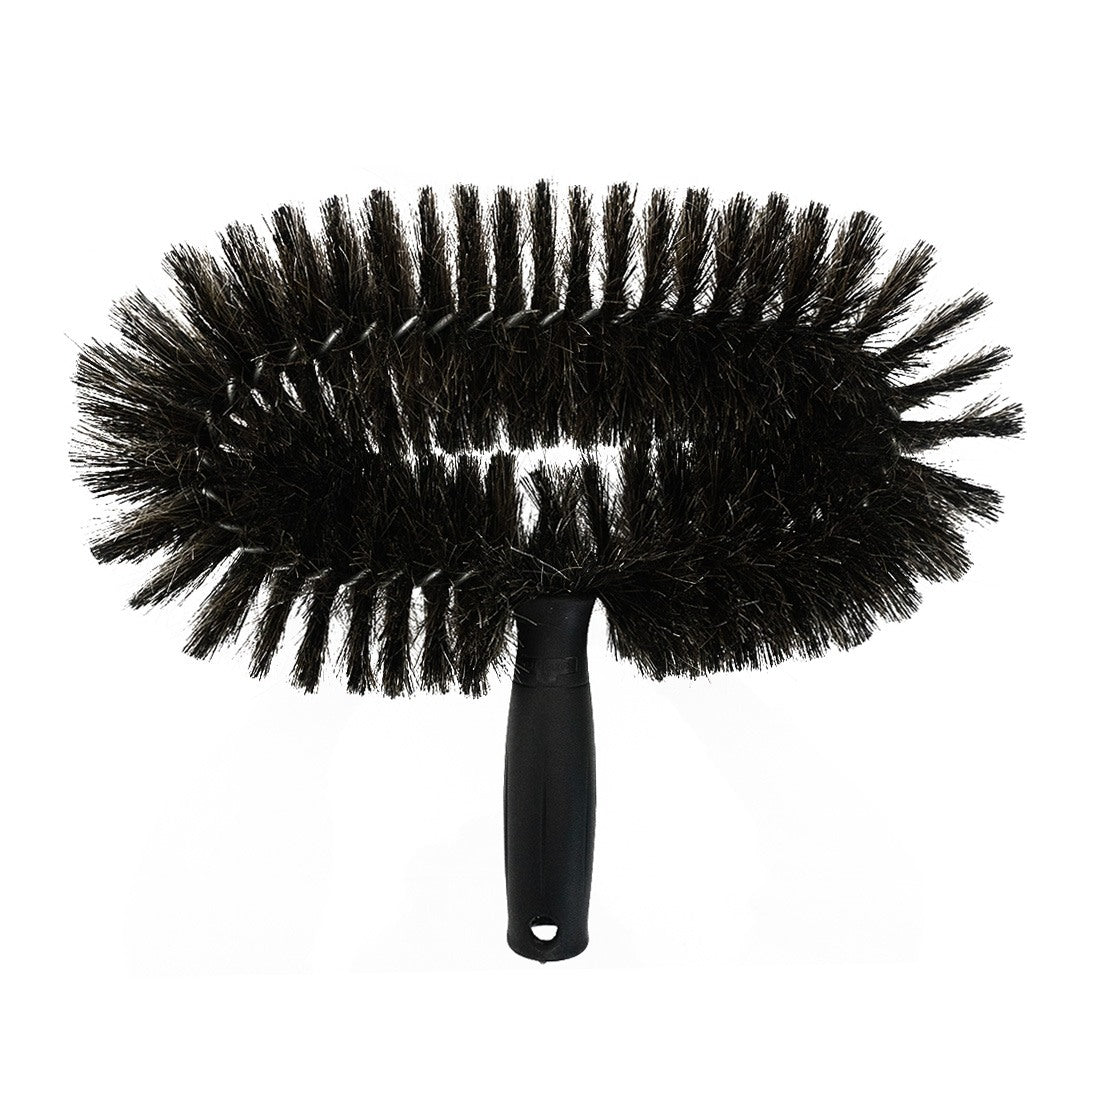 Unger StarDuster 11 Inch Curved Round and Bendable Pipe Brush